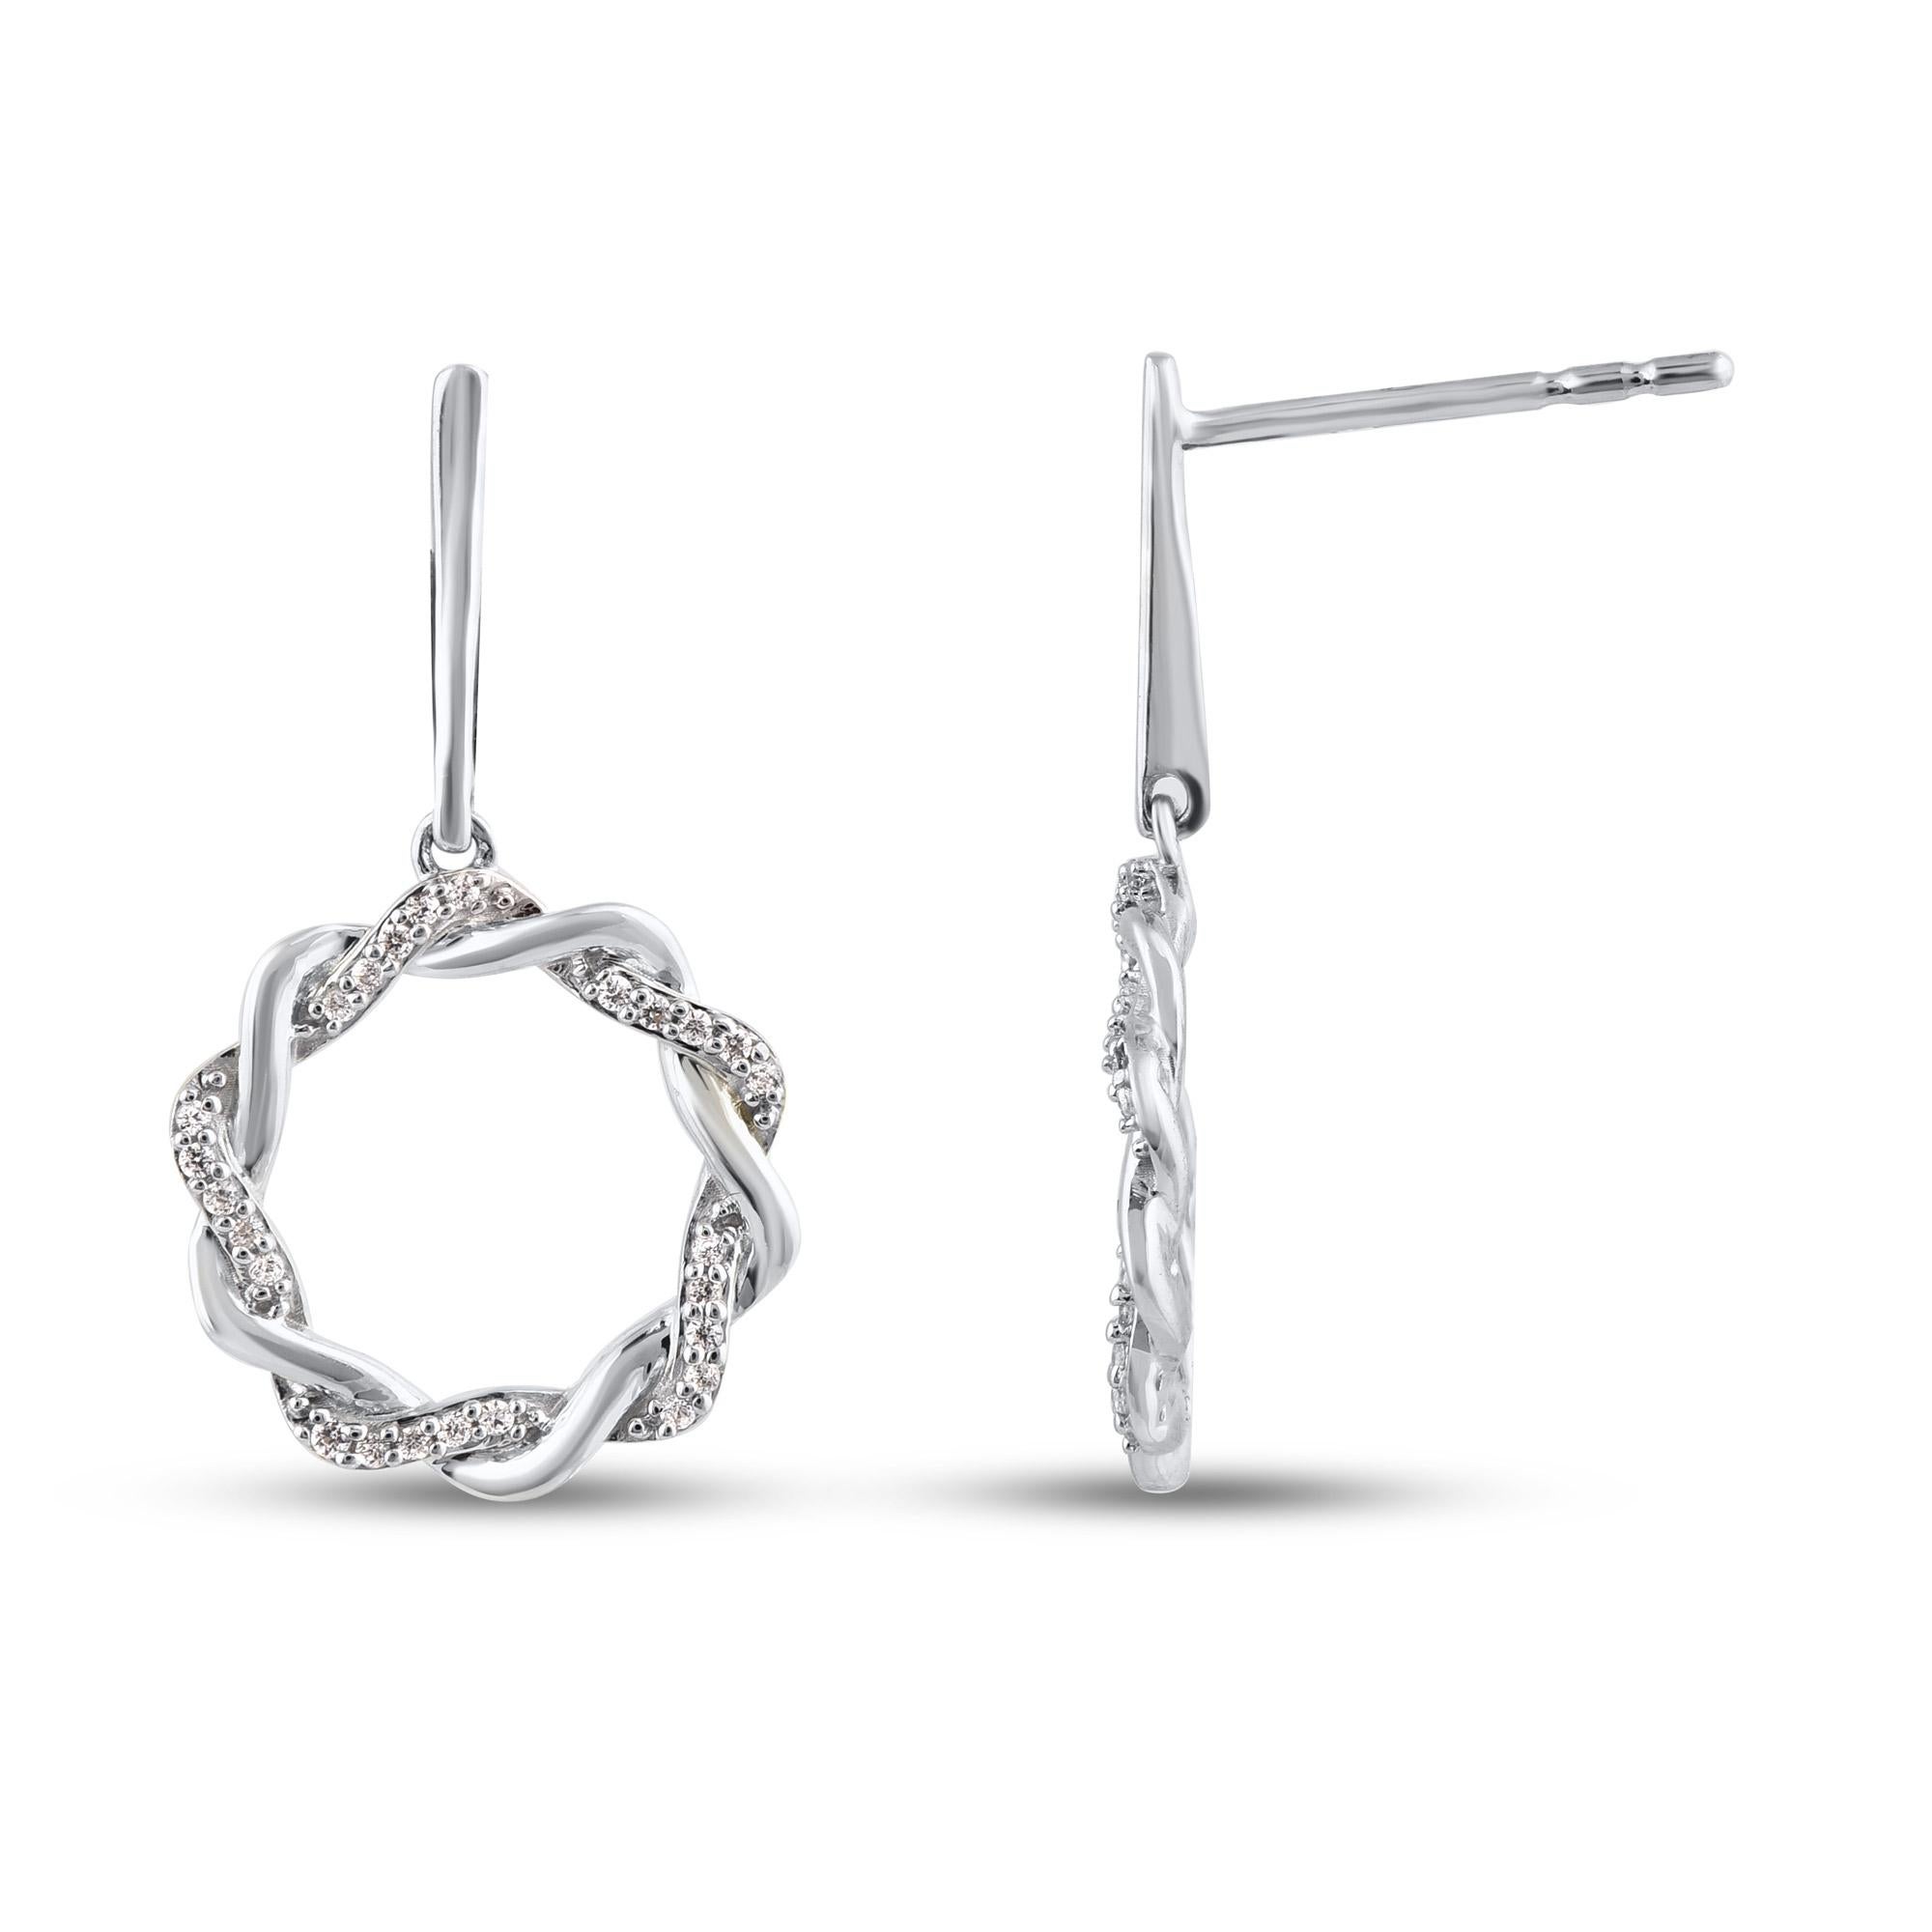 The perfect complement to her classic style, this diamond circle earrings shines with your happily ever after. These earrings feature dazzling with 50 single cut round diamond set in prong setting. Total diamond weight is 0.10 carat. These earrings